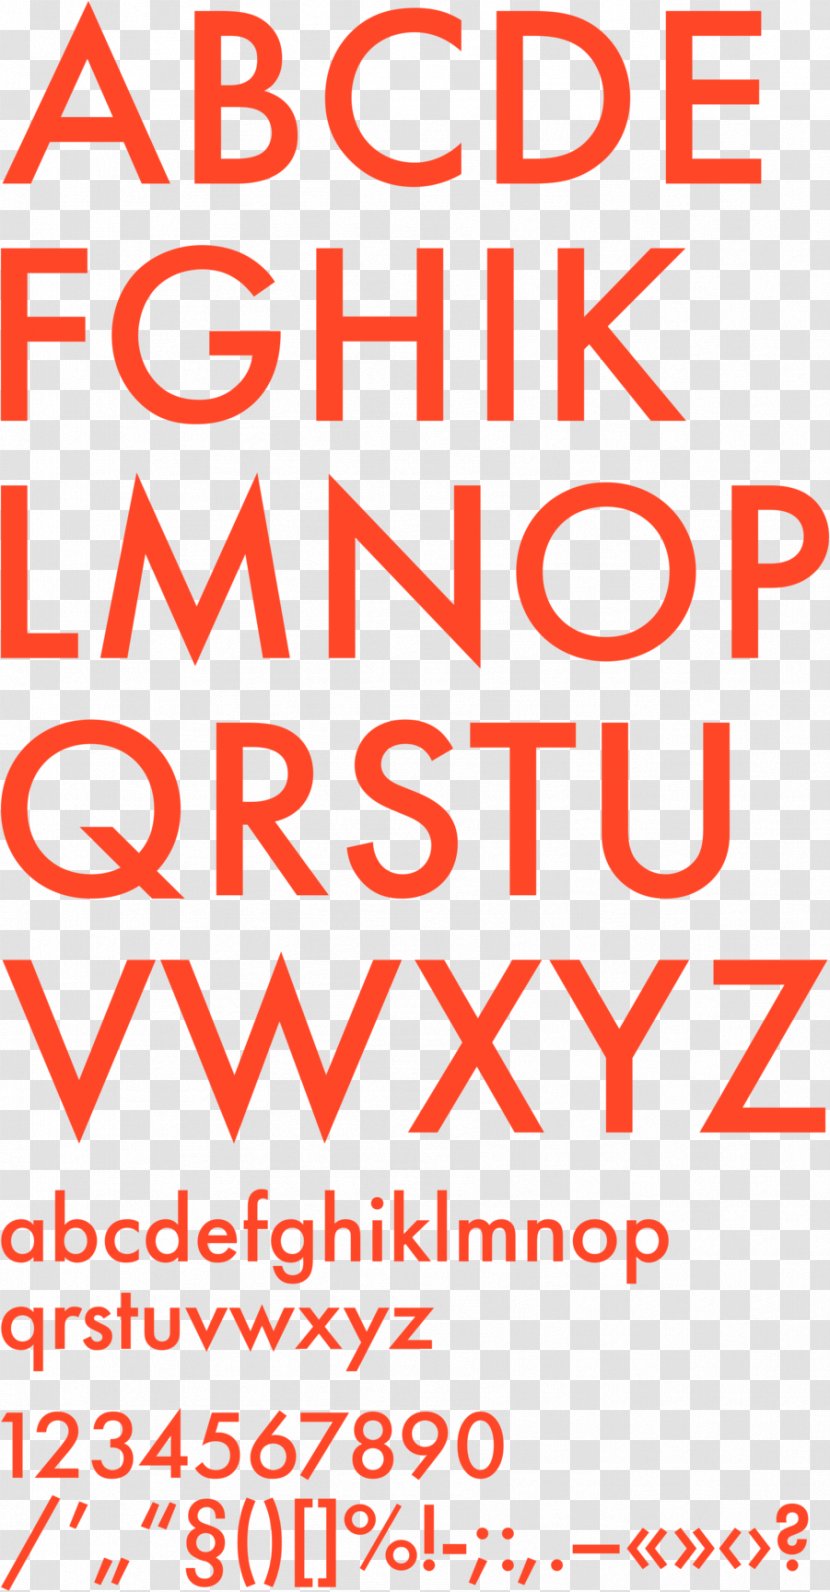 Swedish Alphabet Letter Poster Finnish Orthography - Number - Roman Square Capitals Transparent PNG